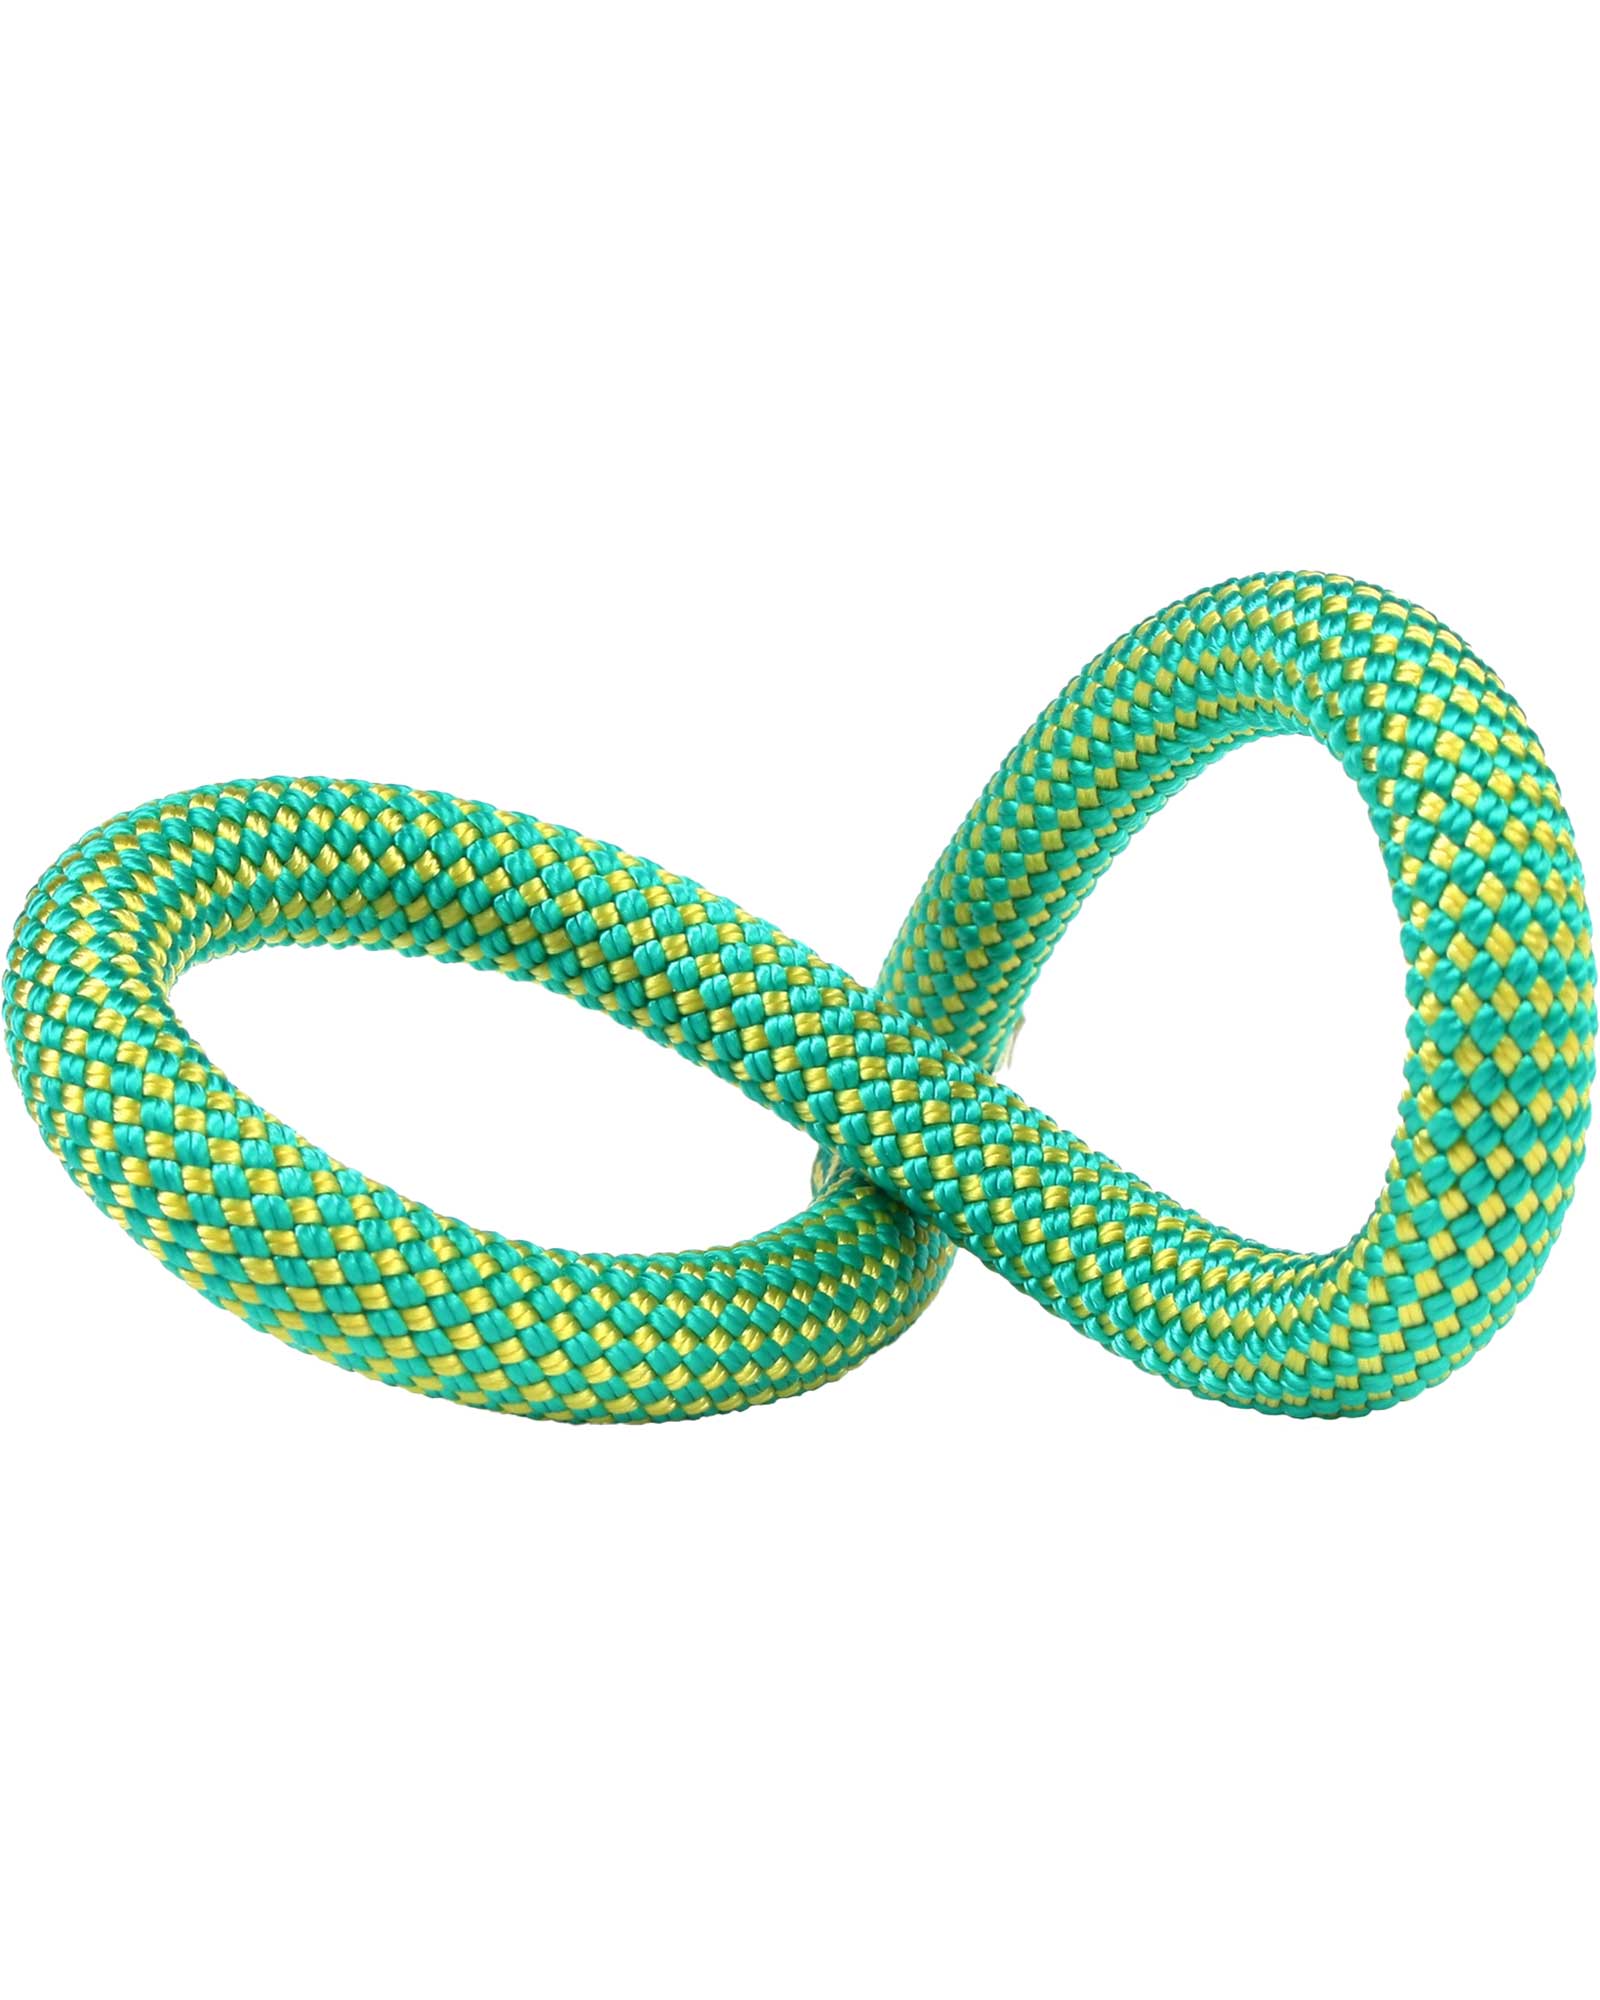 Edelweiss Performance Unicore Supereverdry 9.2mm x 70m Rope - Green 70m